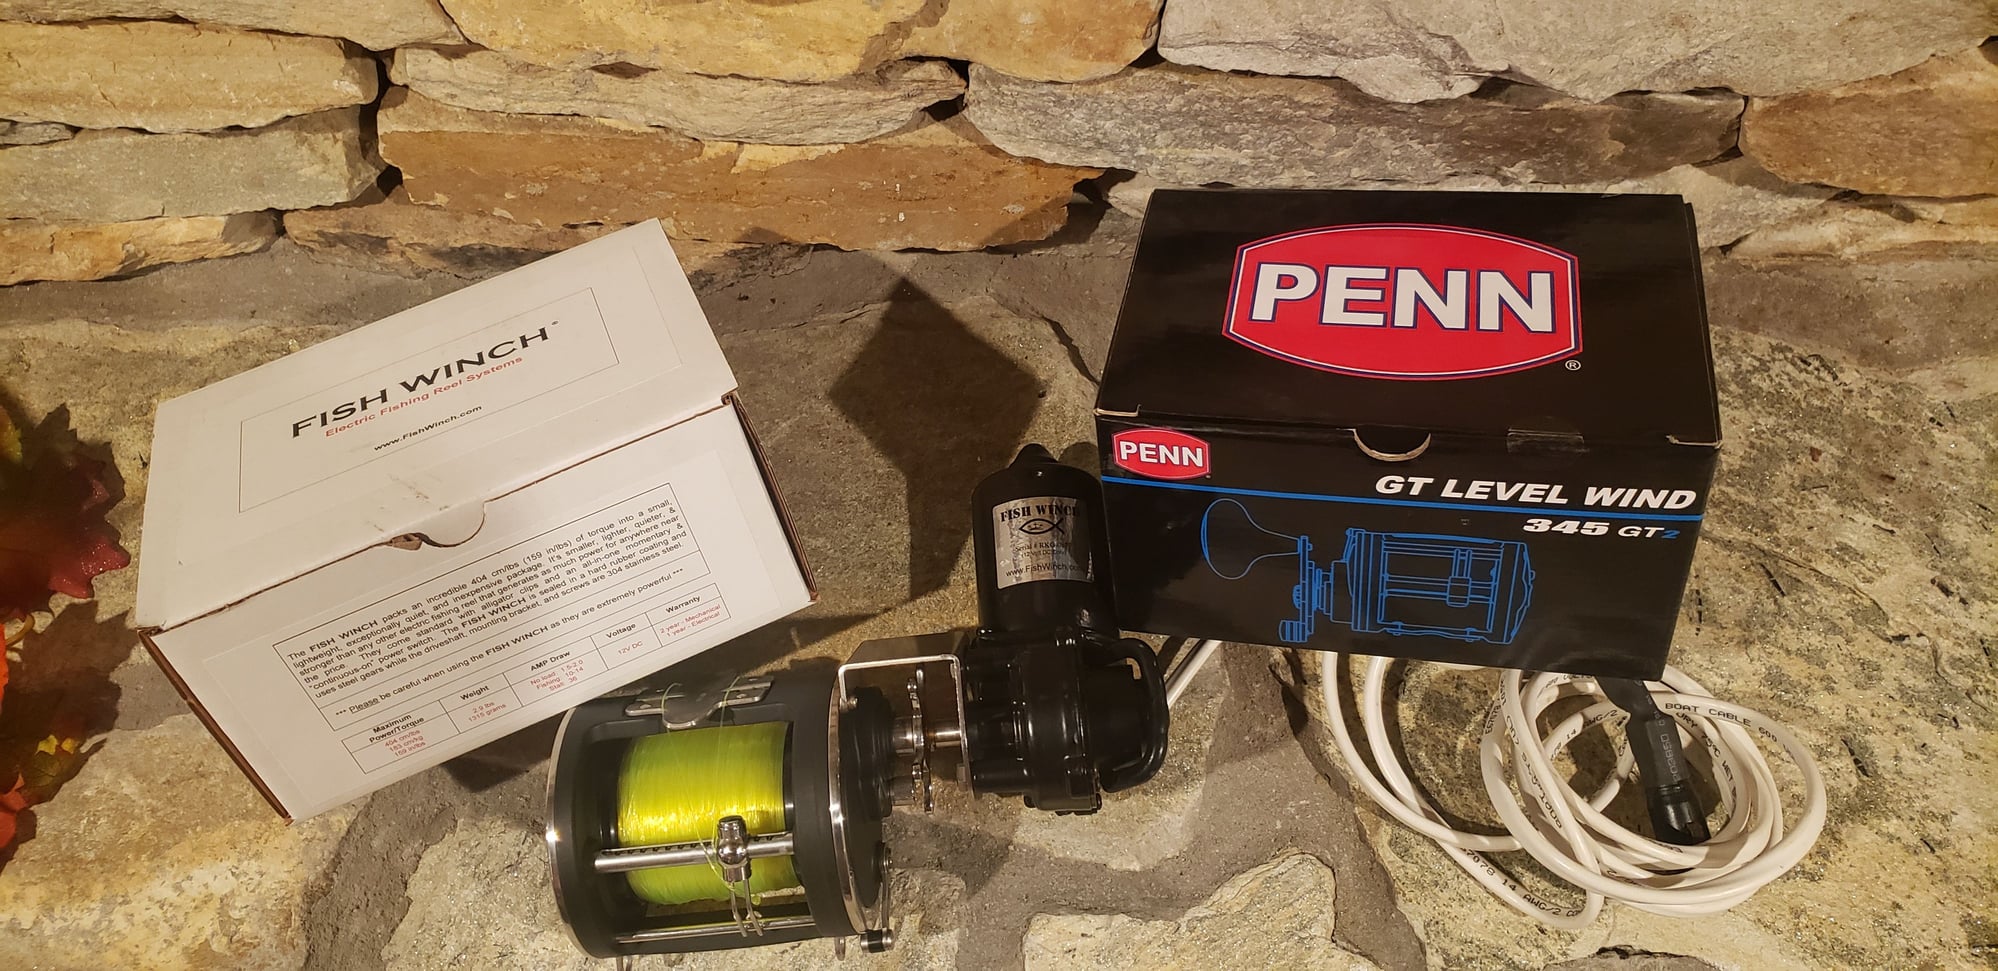 Fish winch with Penn 345GT2 - The Hull Truth - Boating and Fishing